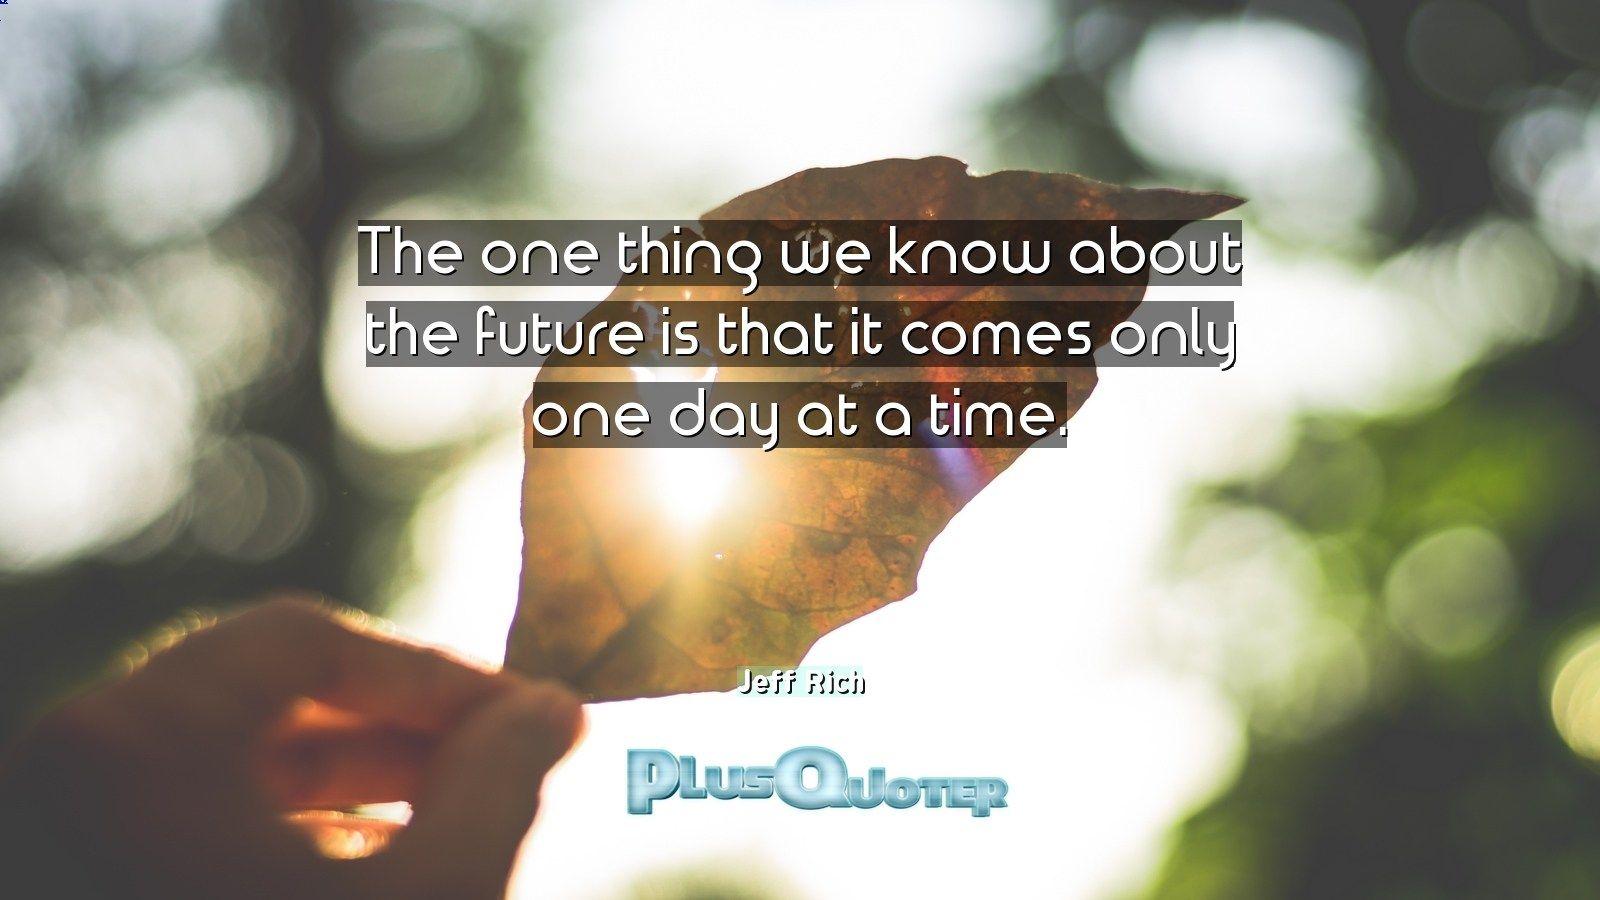 The one thing we know about the future is that it comes only one